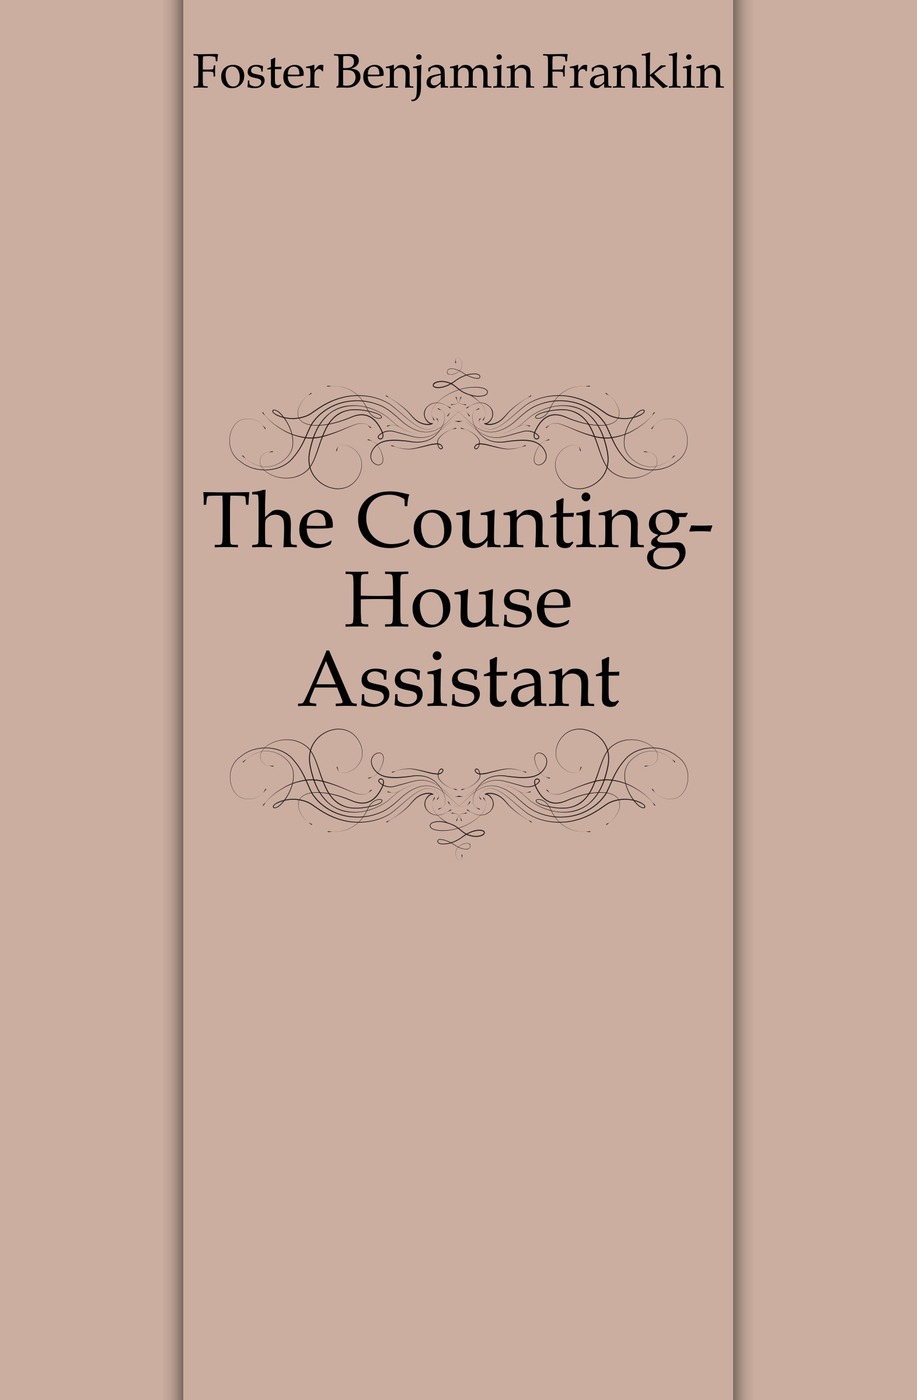 The Counting-House Assistant